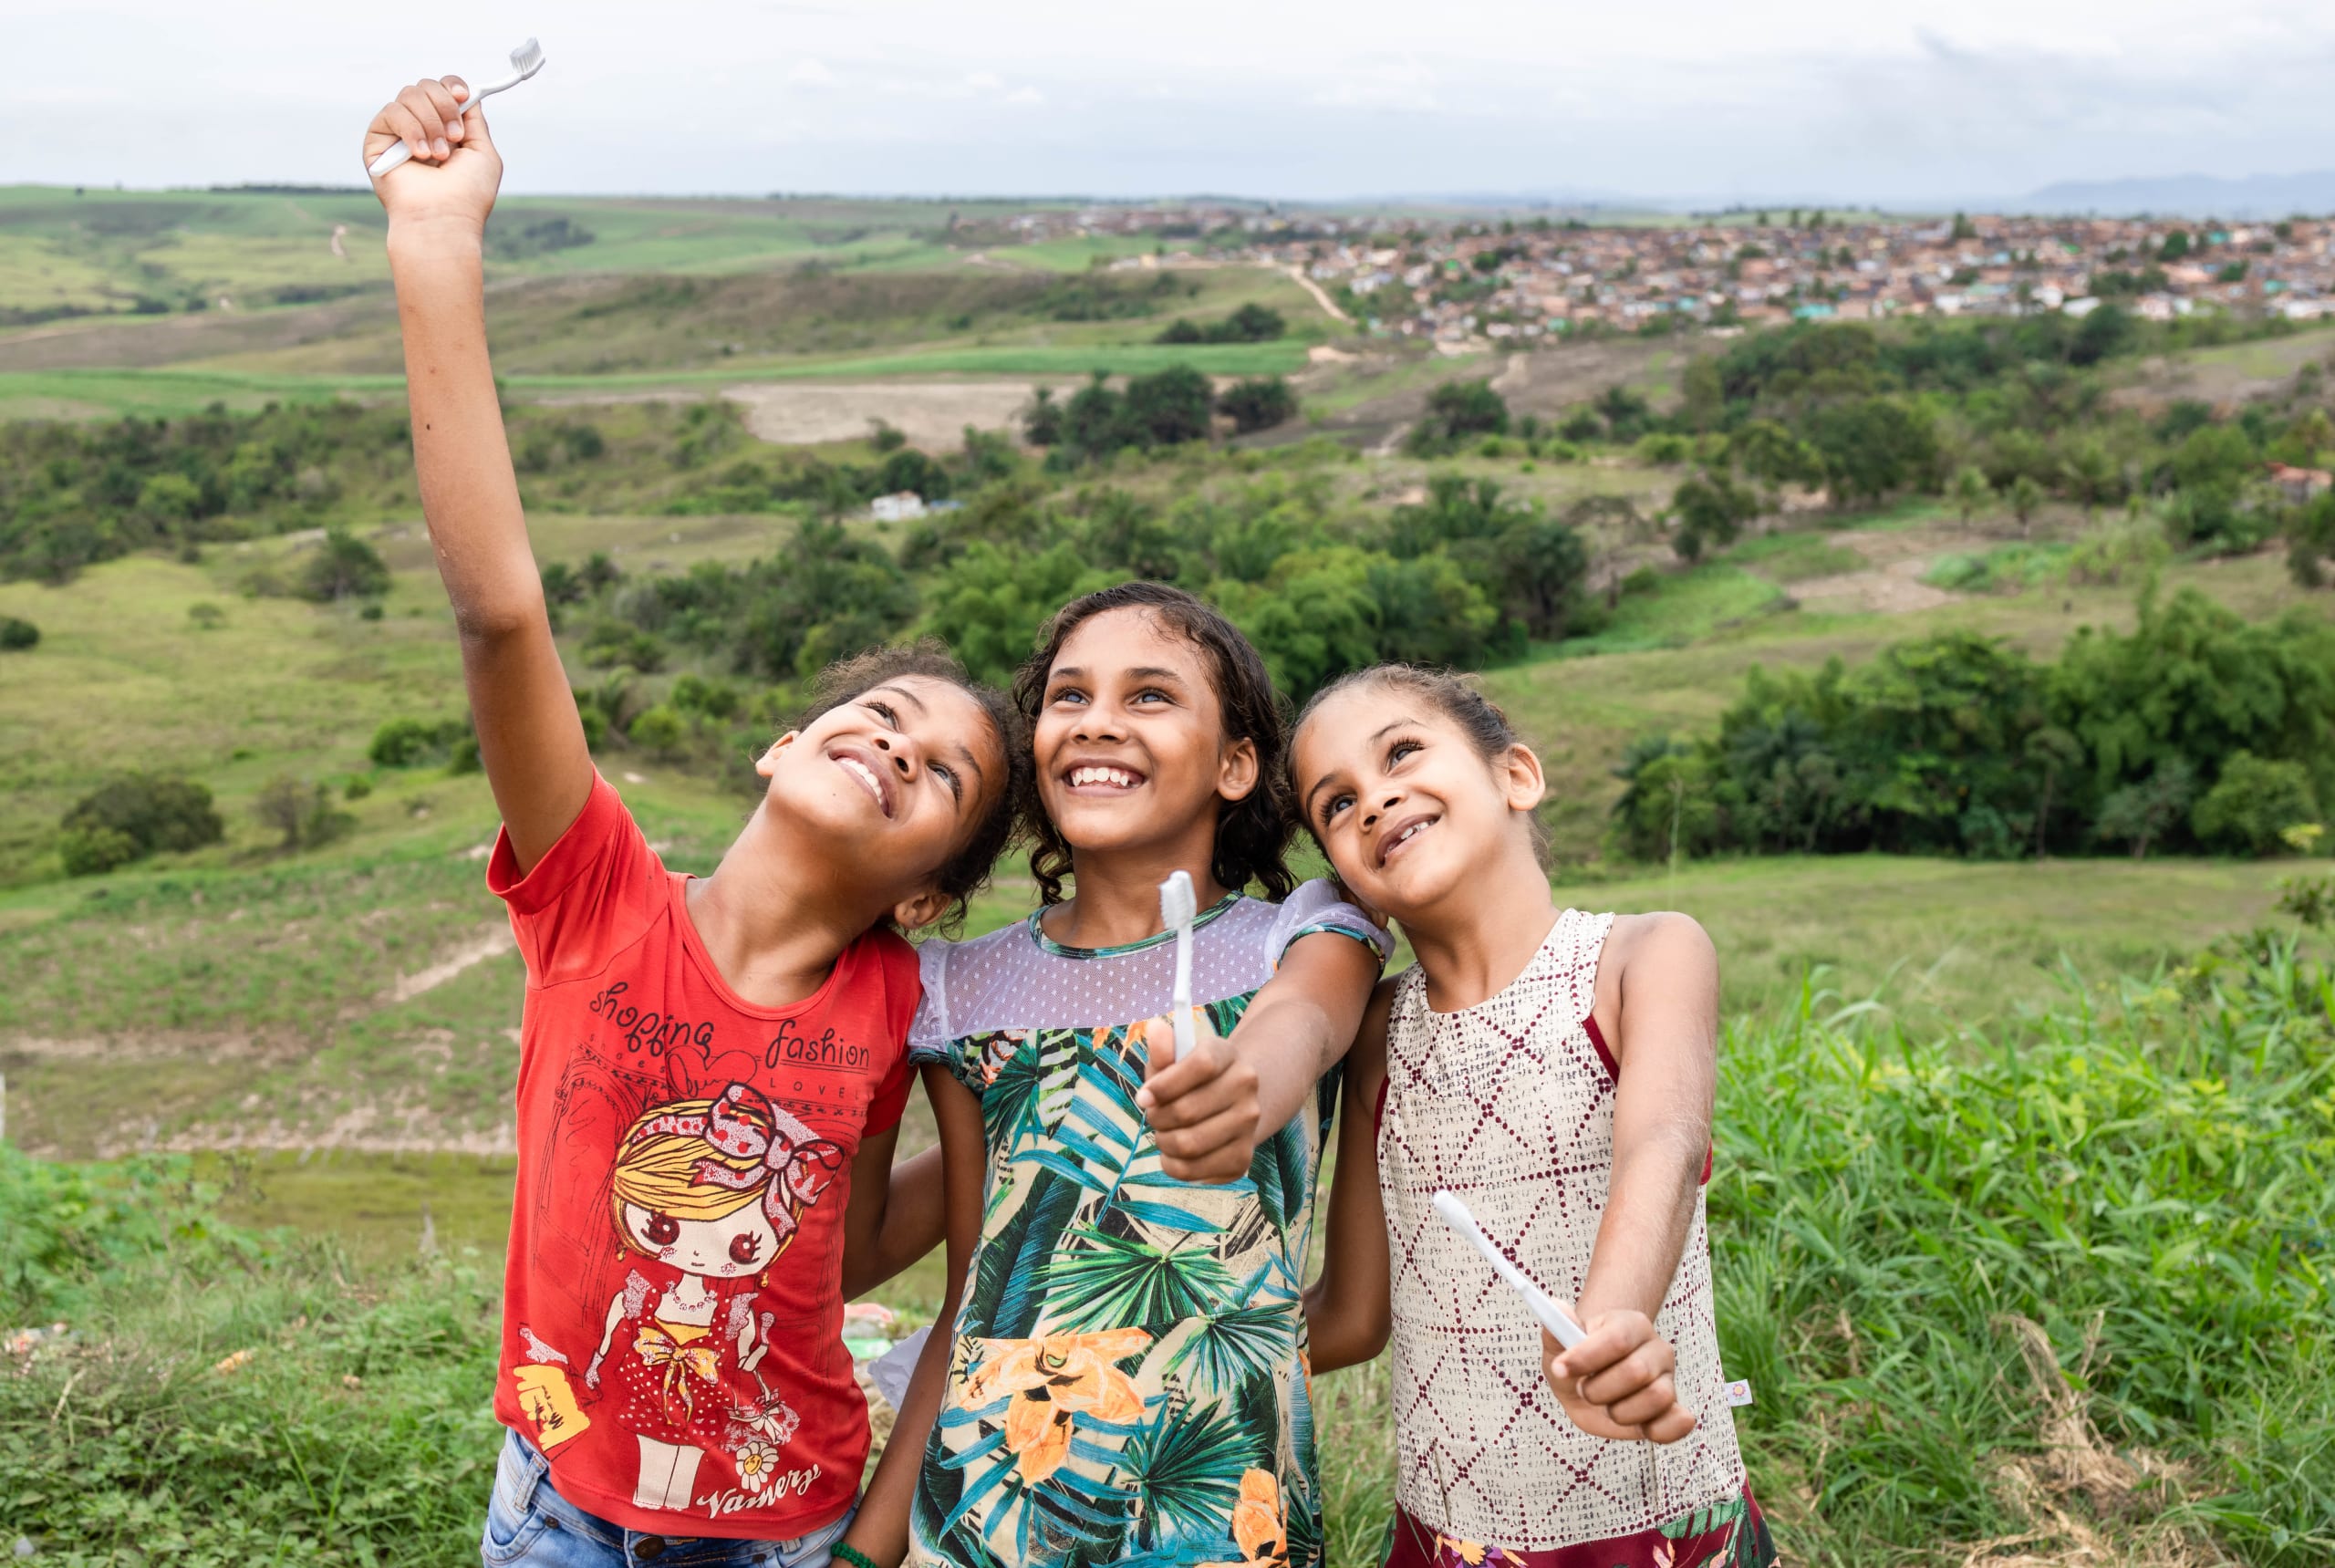 Three girls standing on a hill hold up toothbrushes and smile.